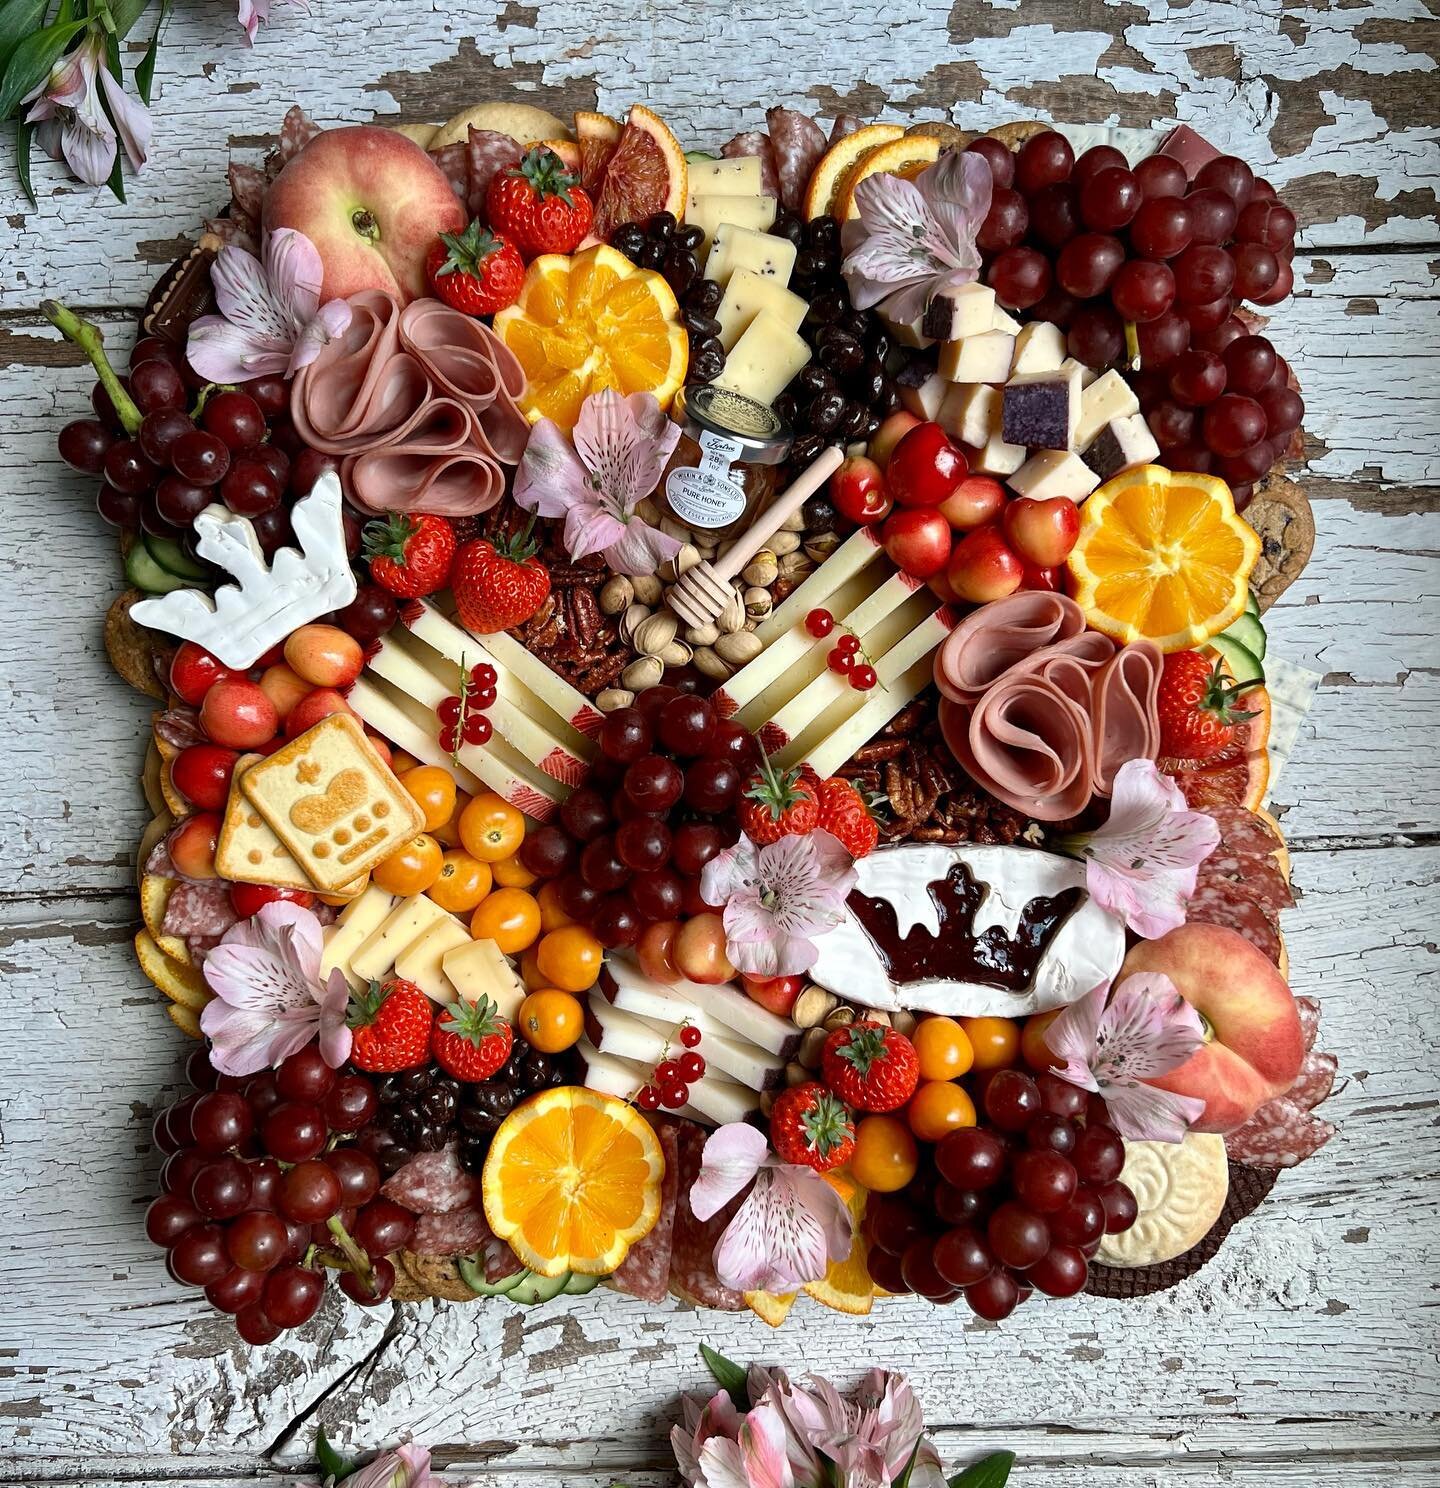 Trumpet roll 🎺 &hellip; 

All hail the &ldquo;Fit for a Queen&rdquo; board 👸🏻 A Royal Regal spread of cheese and charcuterie, surrounded by donut 🍑 rainier 🍒 gooseberries 🟡 and @oishii.berry omakase 🍓 all nestled in chocolate covered raisins, 